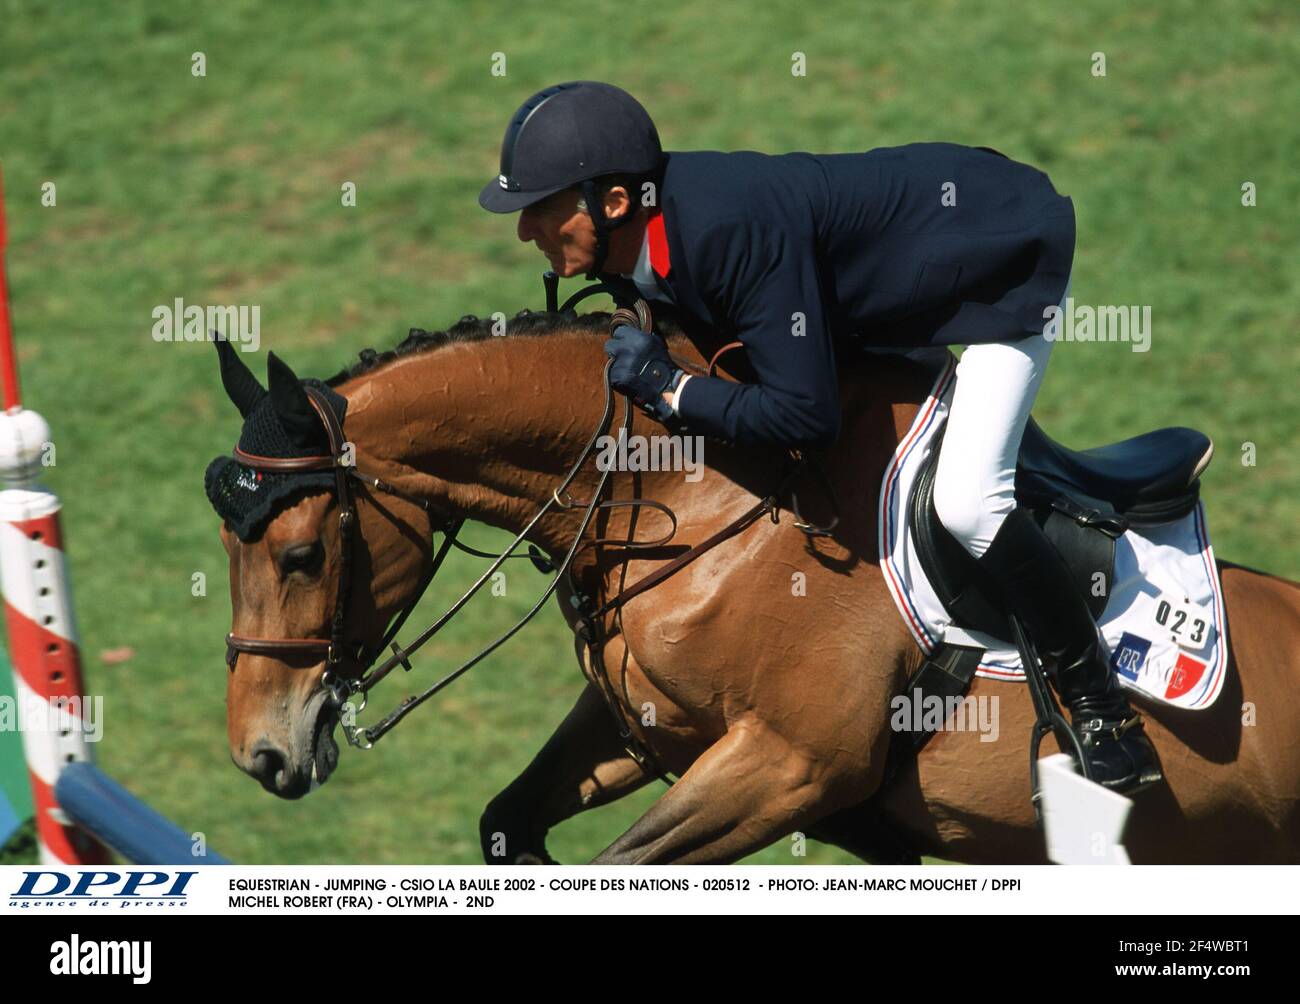 Csio La Baule 2002 High Resolution Stock Photography and Images - Alamy